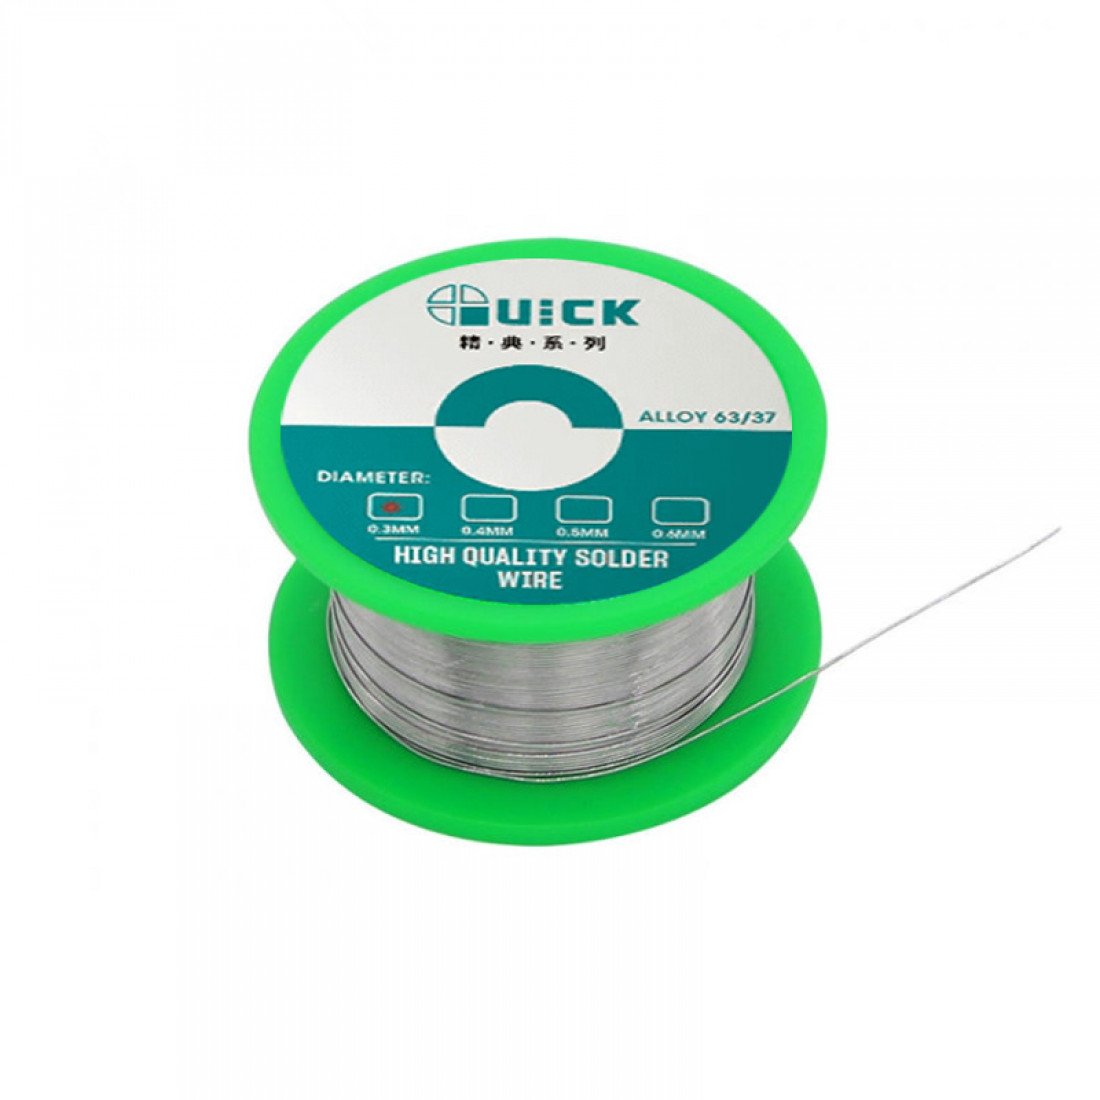 QUICK 0.3MM HIGH-QUALITY SOLDER WIRE